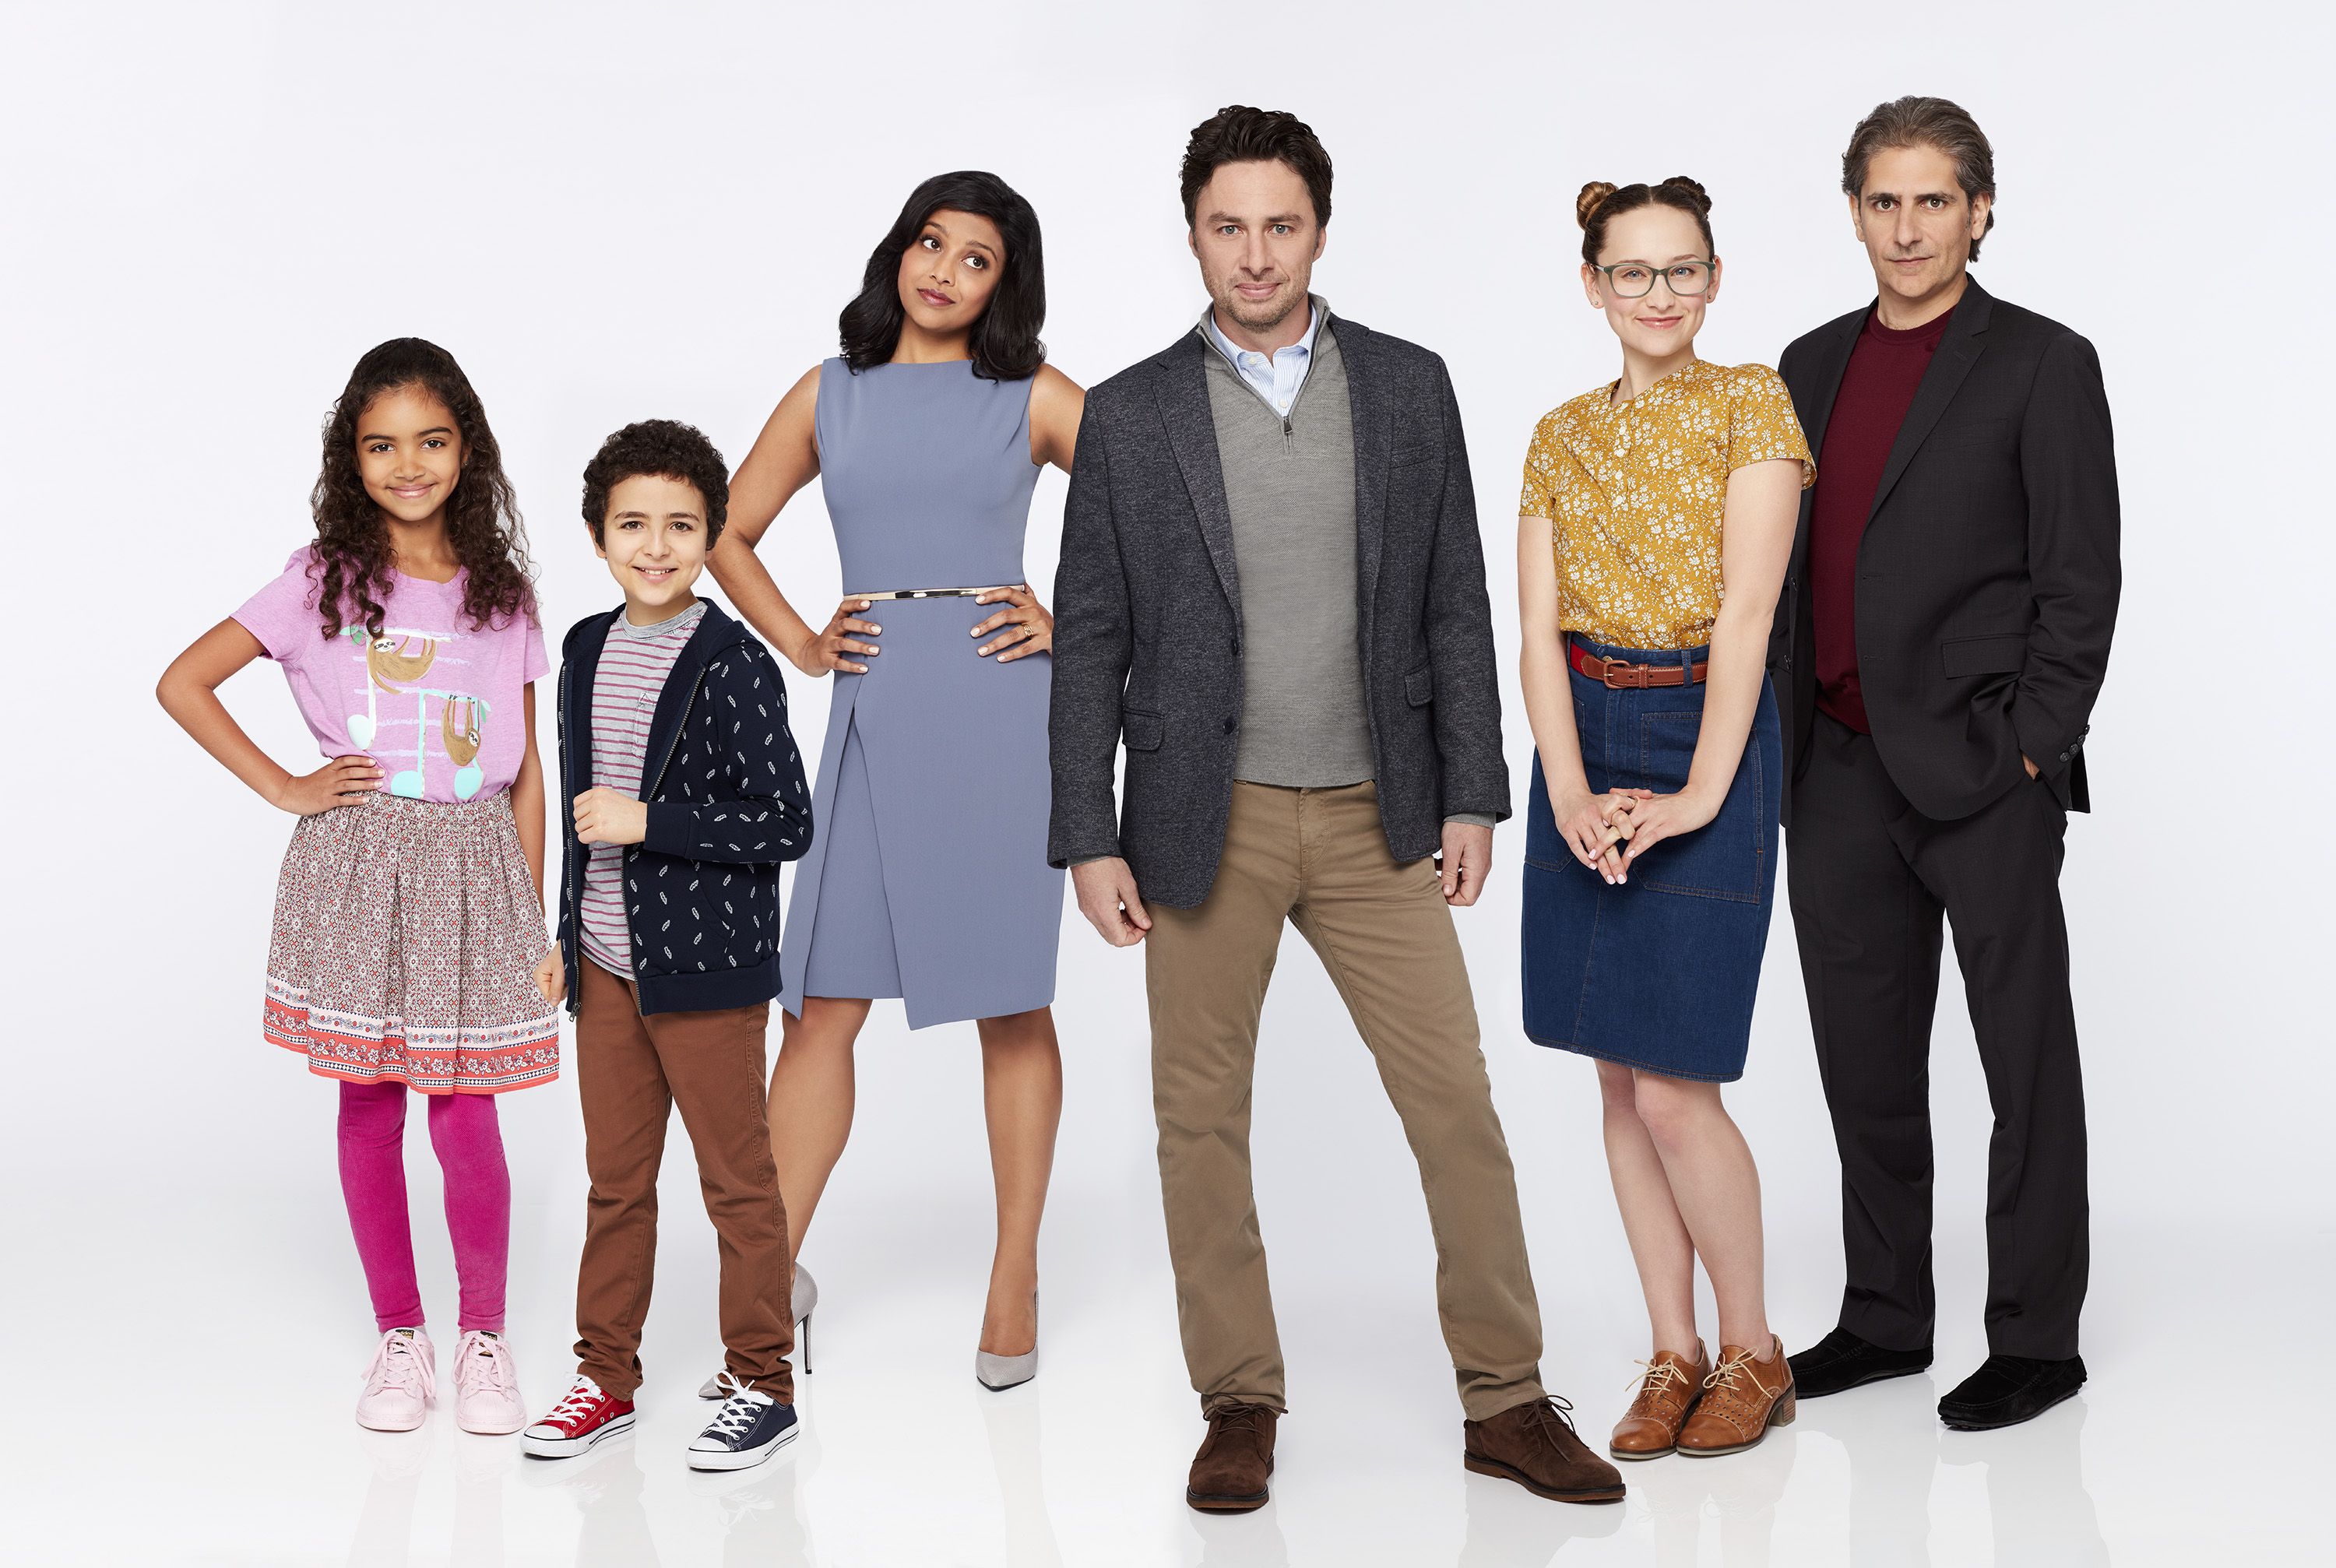 ABC has picked up a new untitled comedy series by Zach Braff